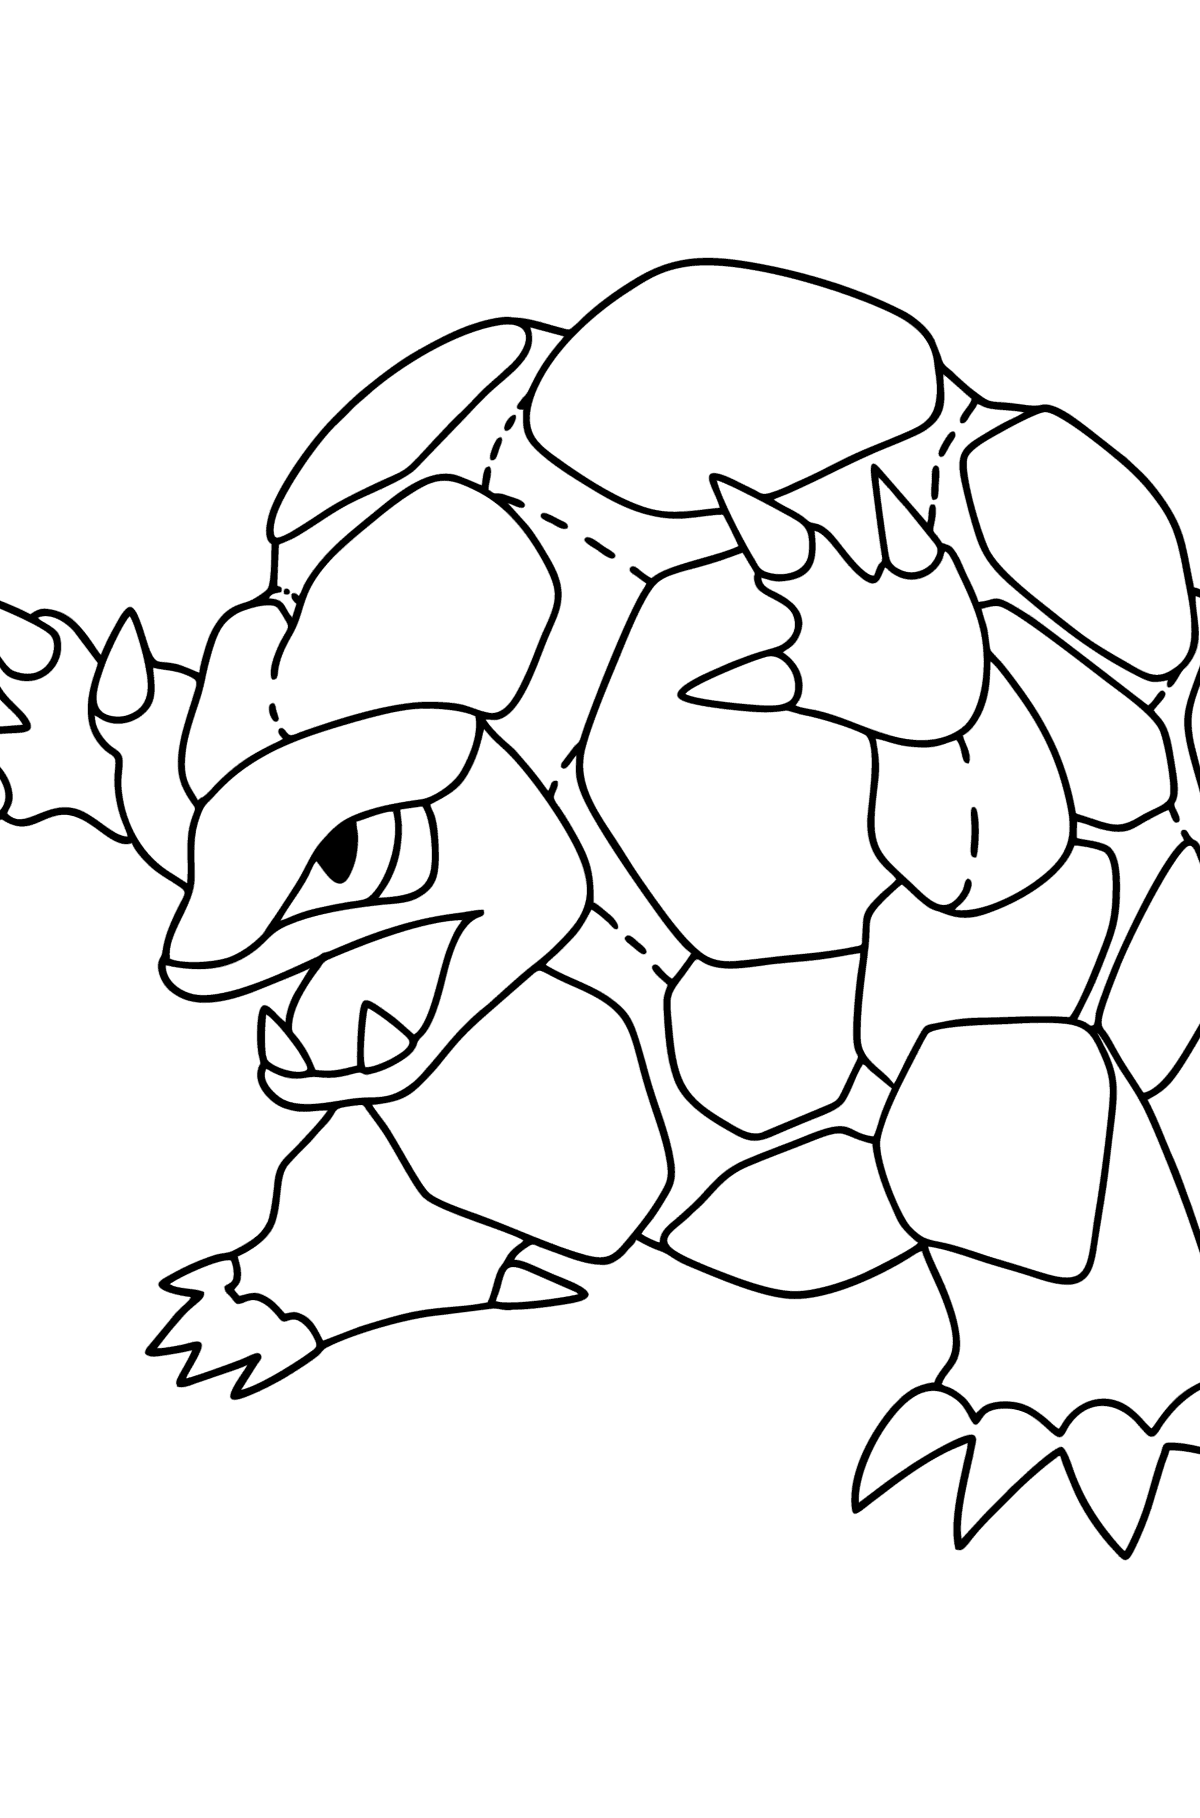 Pokemon Go Golem coloring page - Coloring Pages for Kids